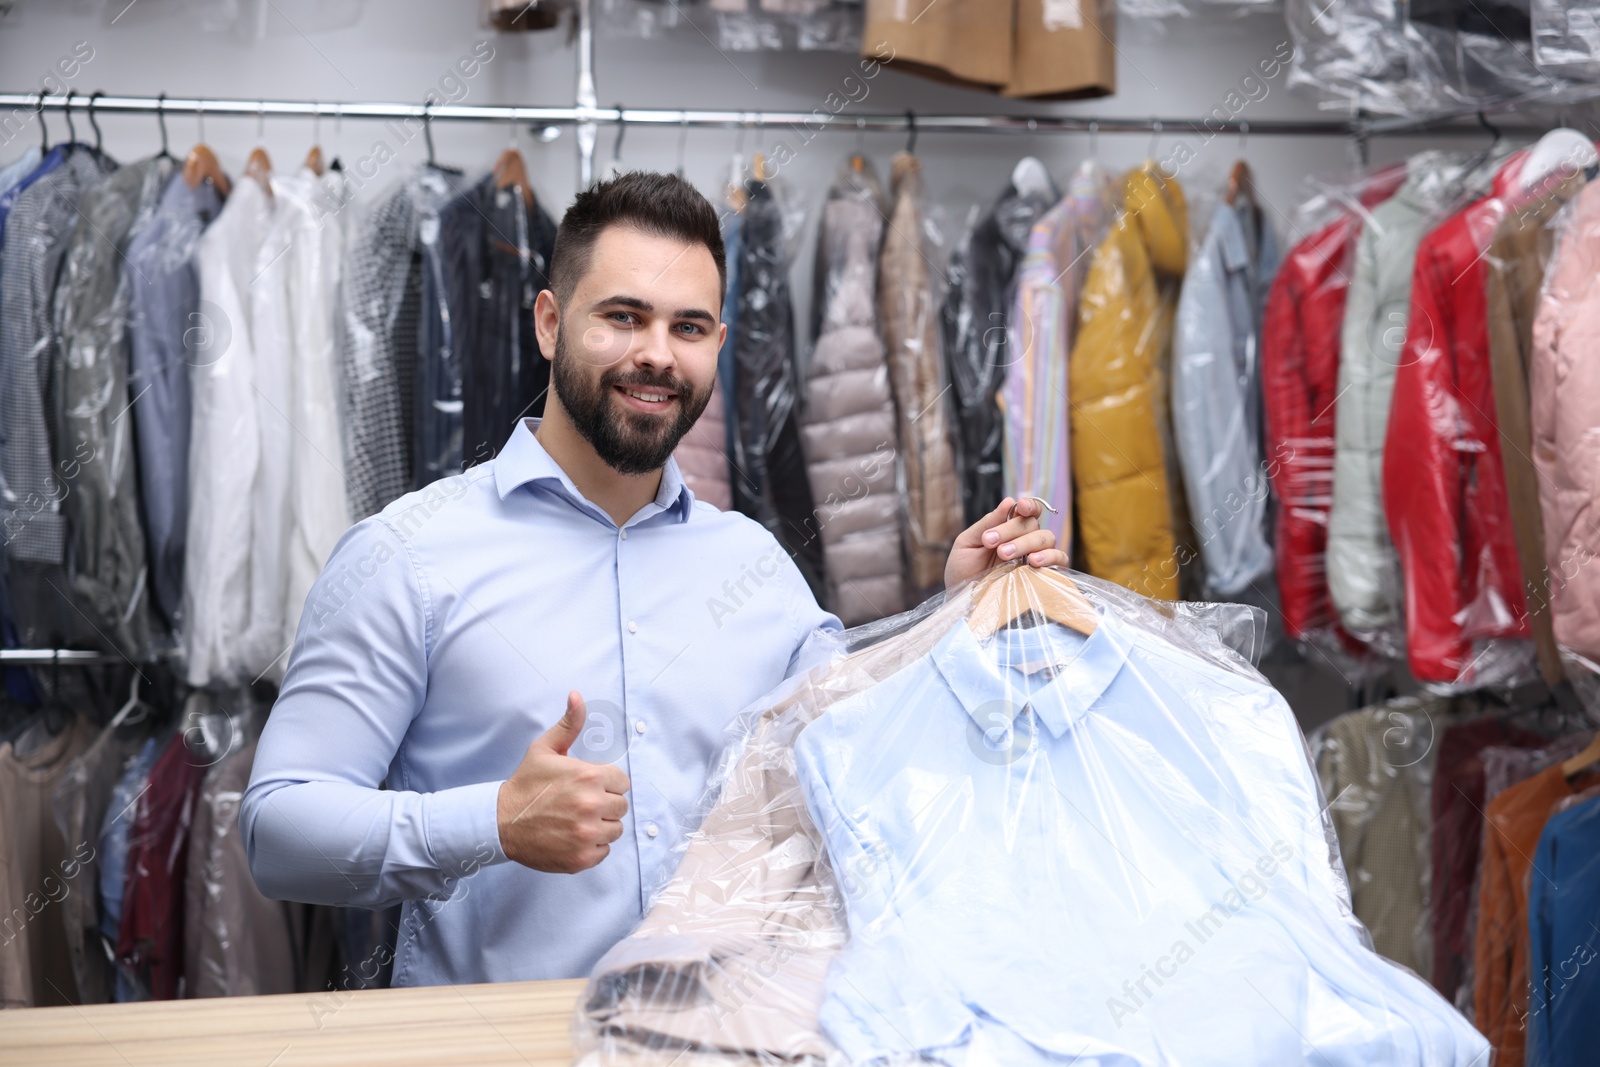 Photo of Dry-cleaning service. Happy worker holding hangers with clothes in plastic bags and showing thumb up at counter indoors